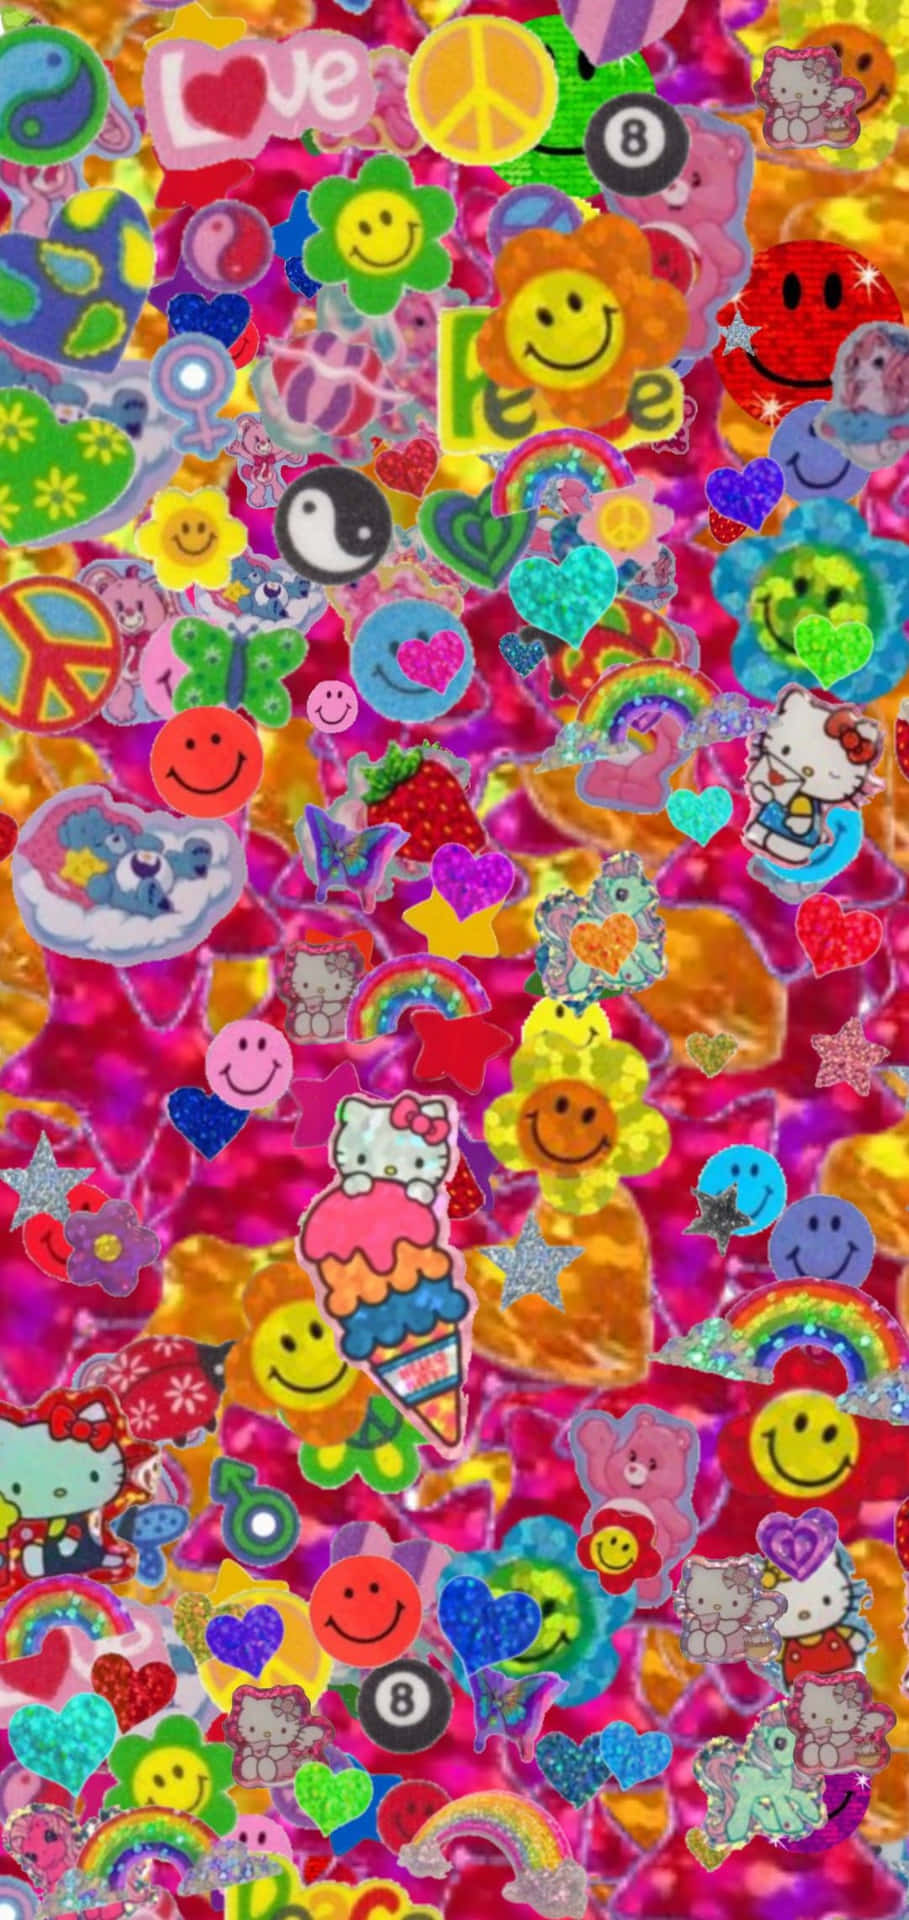 A Colorful Collage Of Stickers